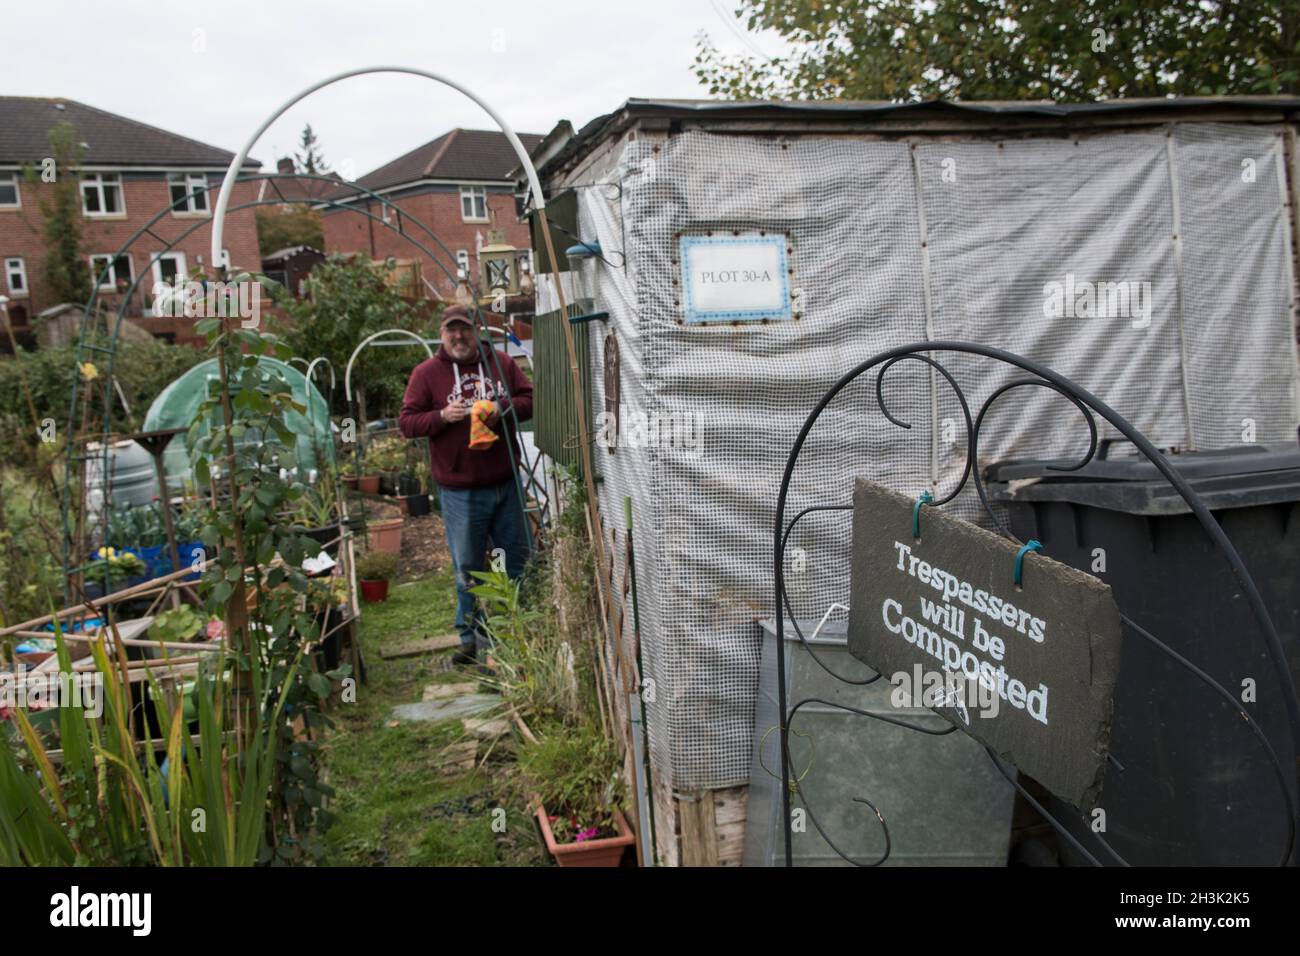 UK Allotments. Trespassers with be Composted, sign on allotment gate. Wingfield Road Allotments Bristol 2021 2020S England HOMER SYKES Stock Photo